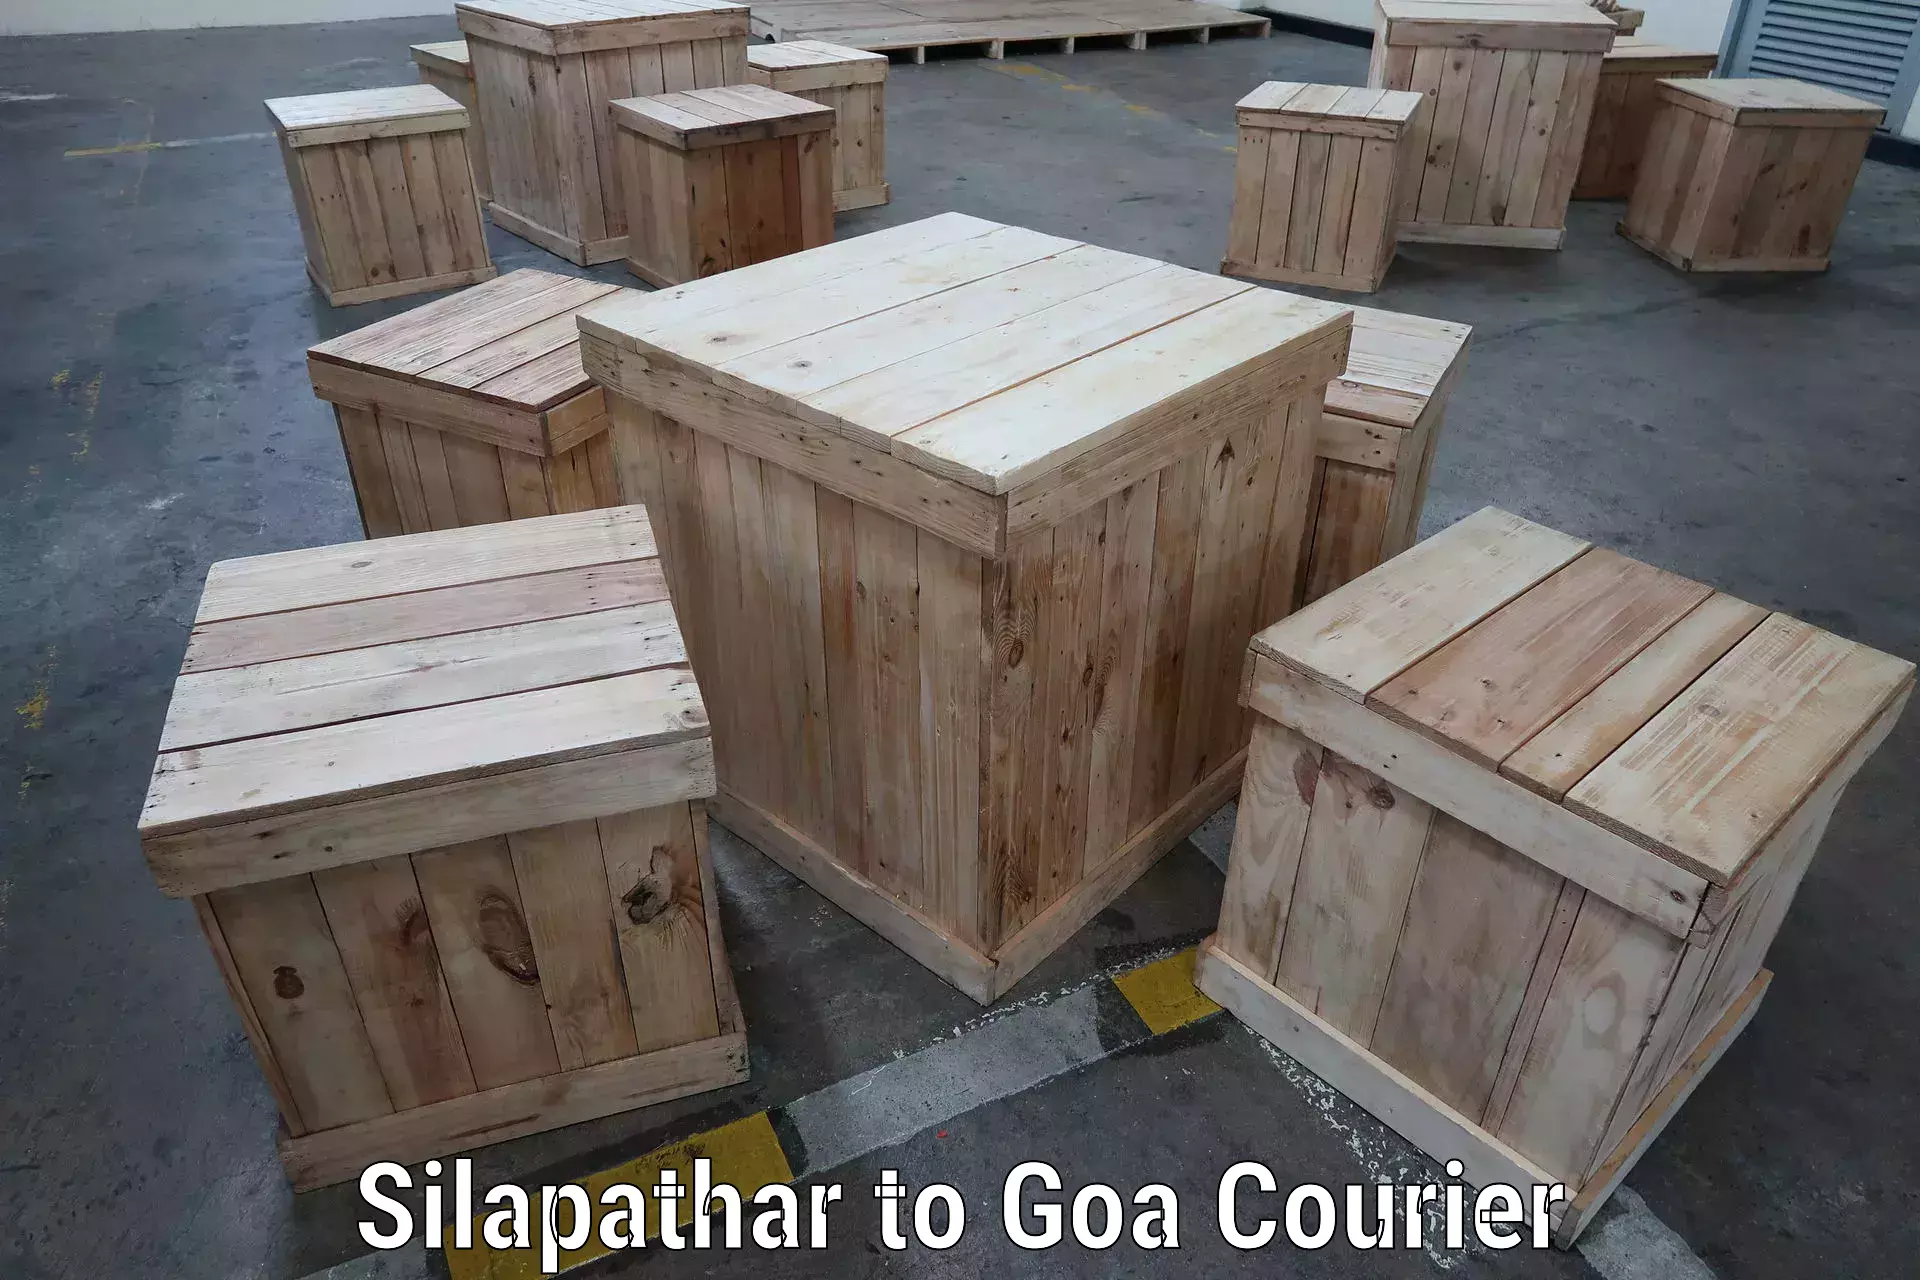 Ground shipping in Silapathar to Ponda